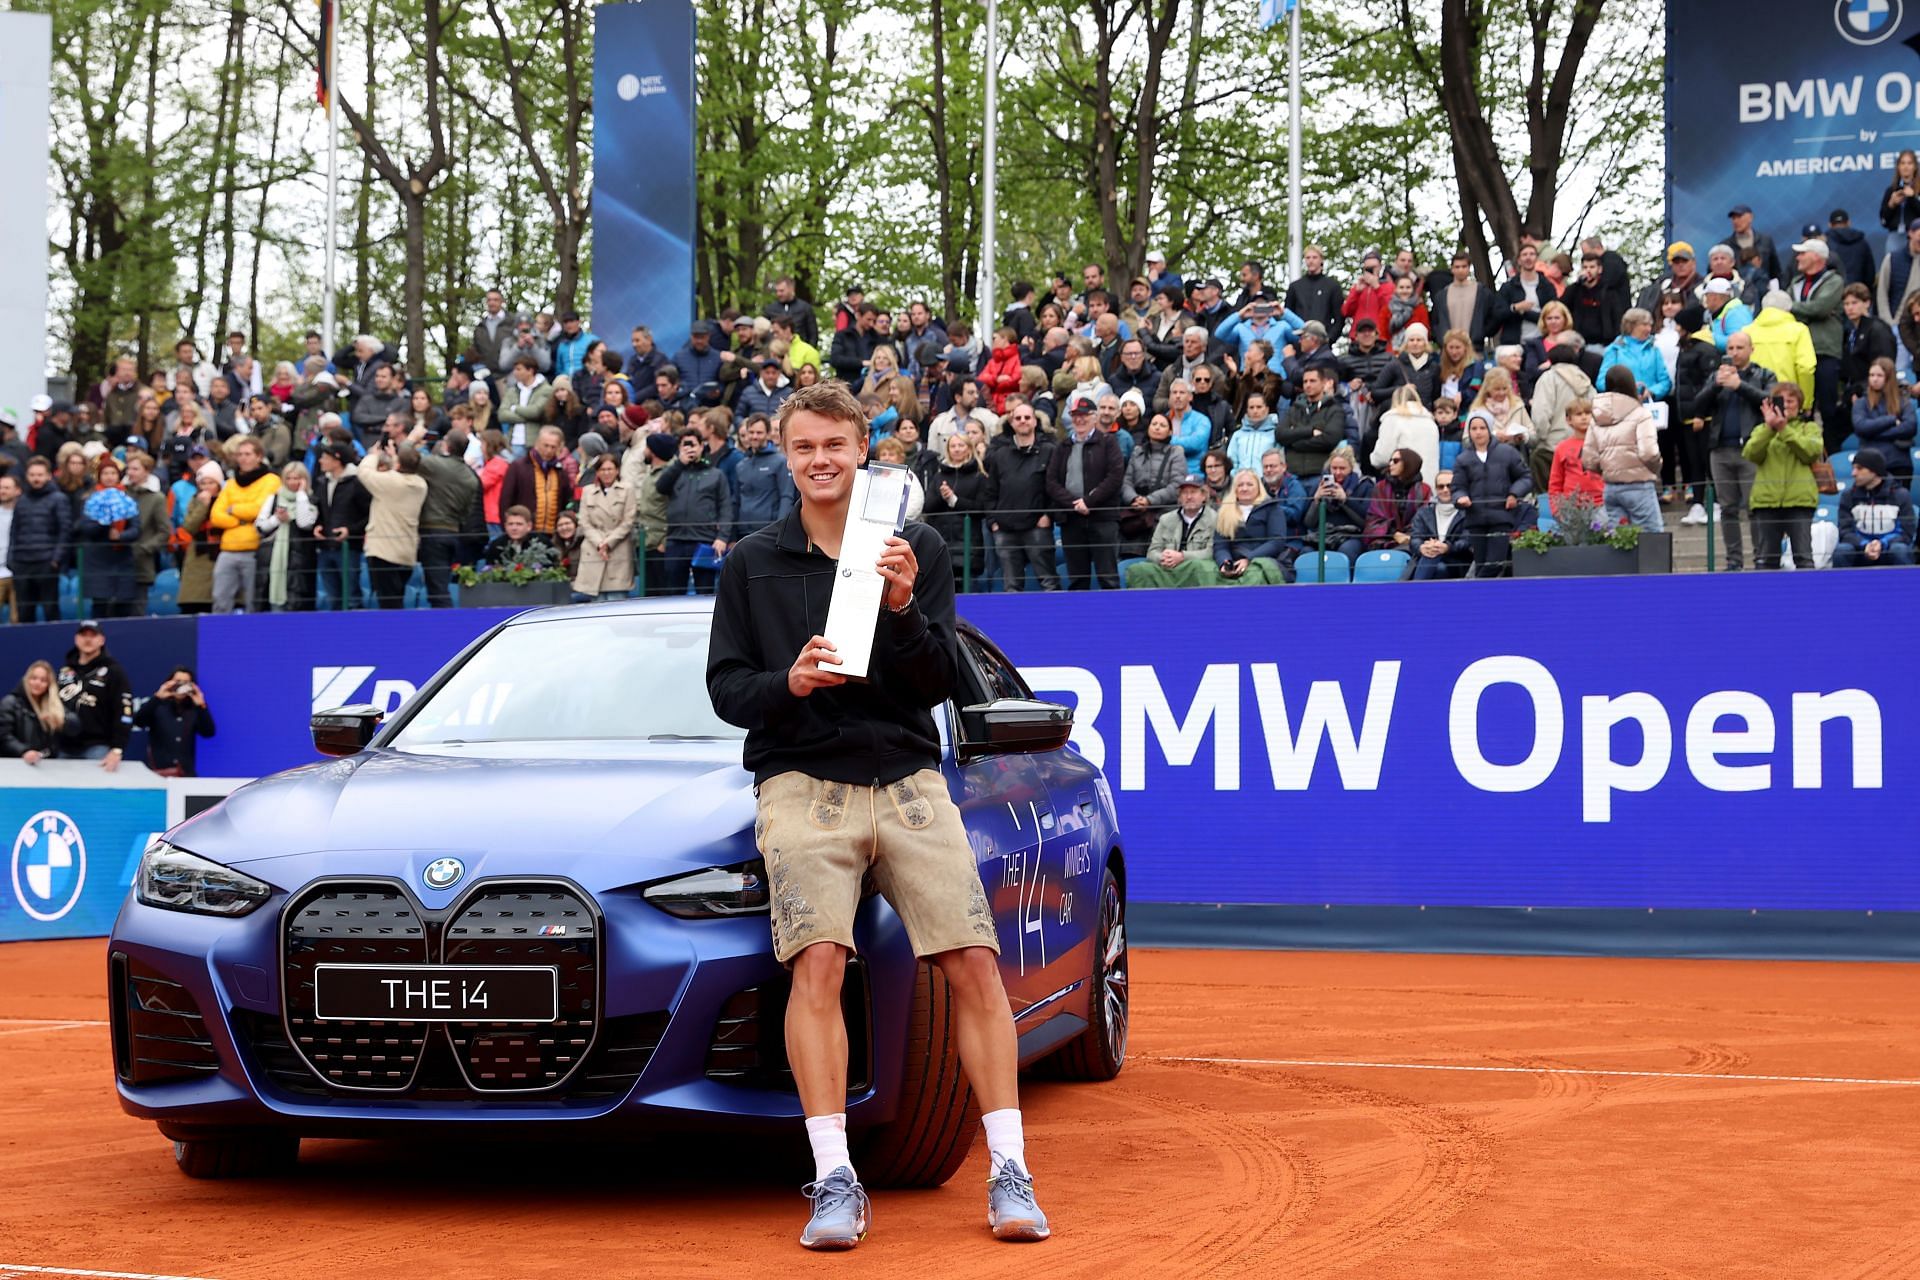 Holger Rune after his title win at the ATP Masters in Munich